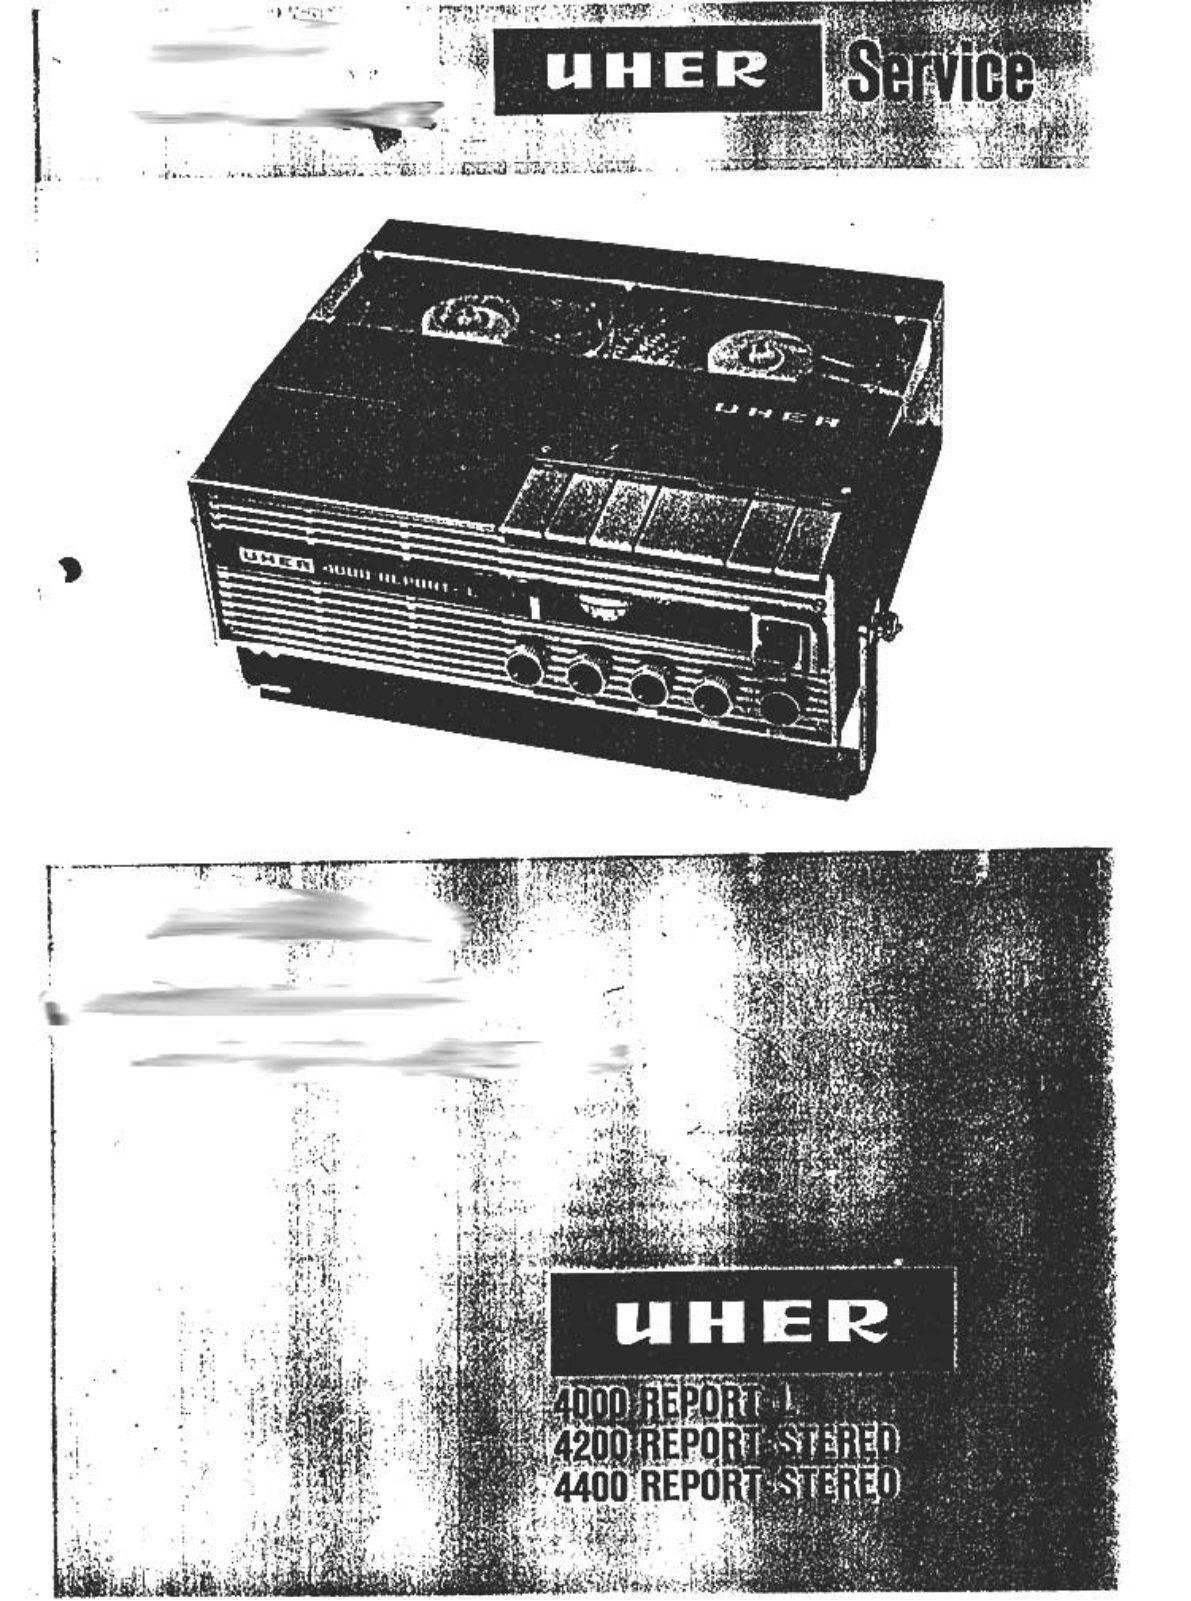 Uher 4400 Report Stereo Service manual